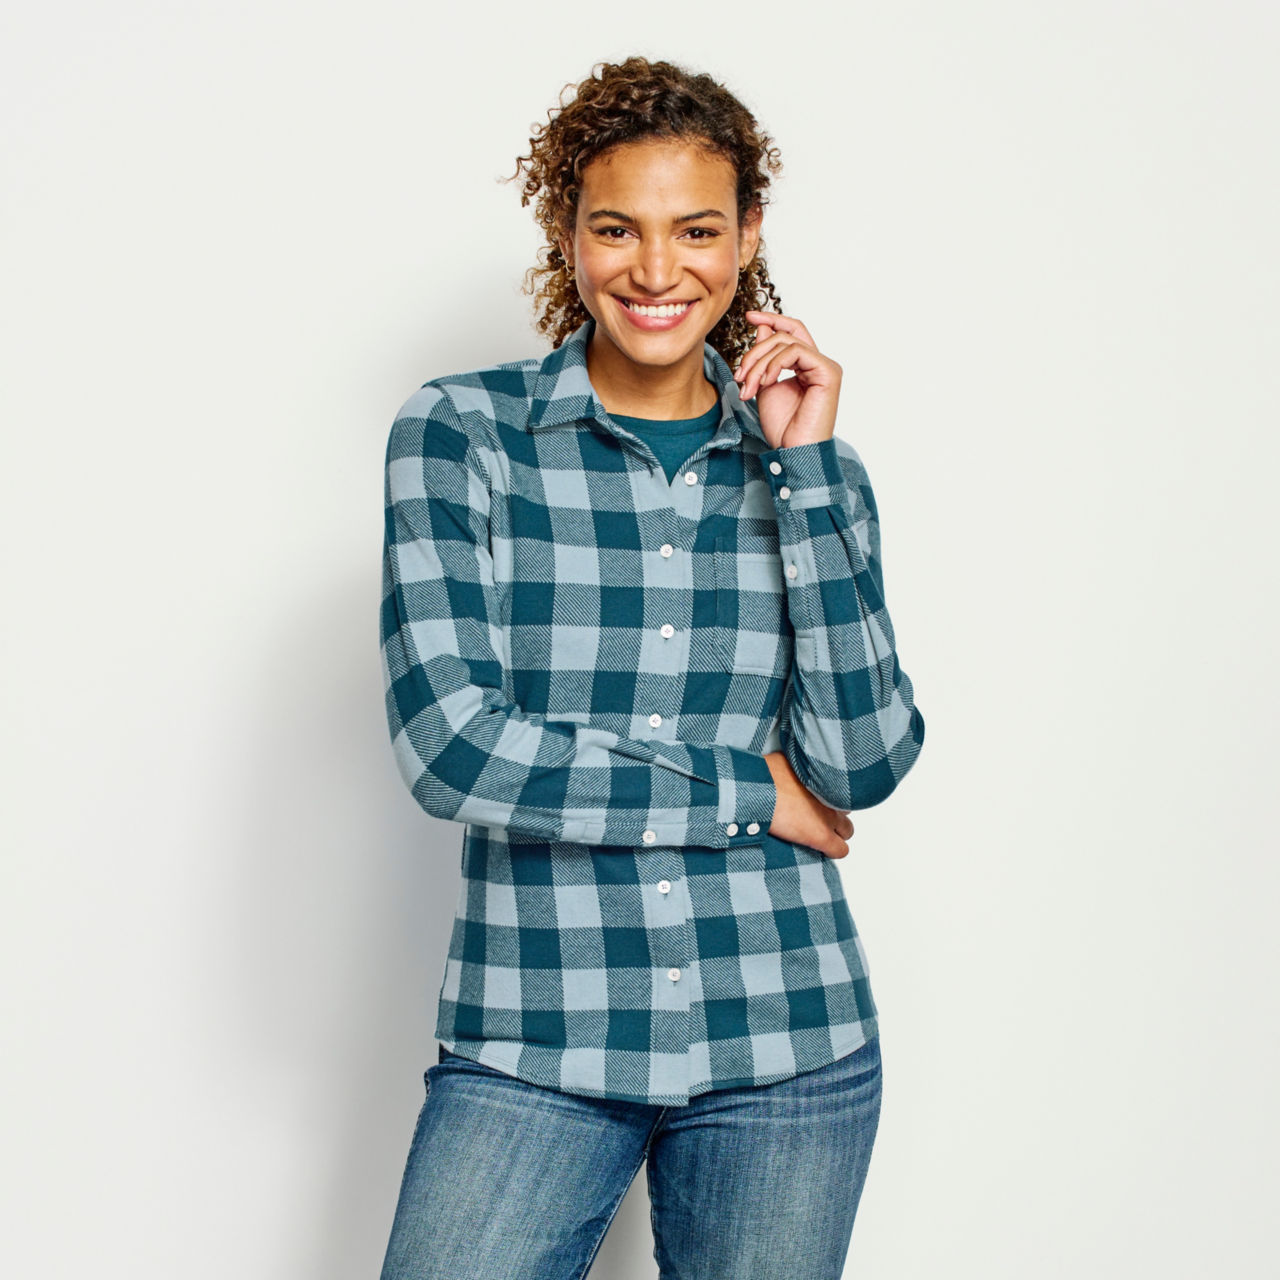 Snowy River Brushed Knit Long-Sleeved Shirt - MINERAL BLUE PLAID image number 0